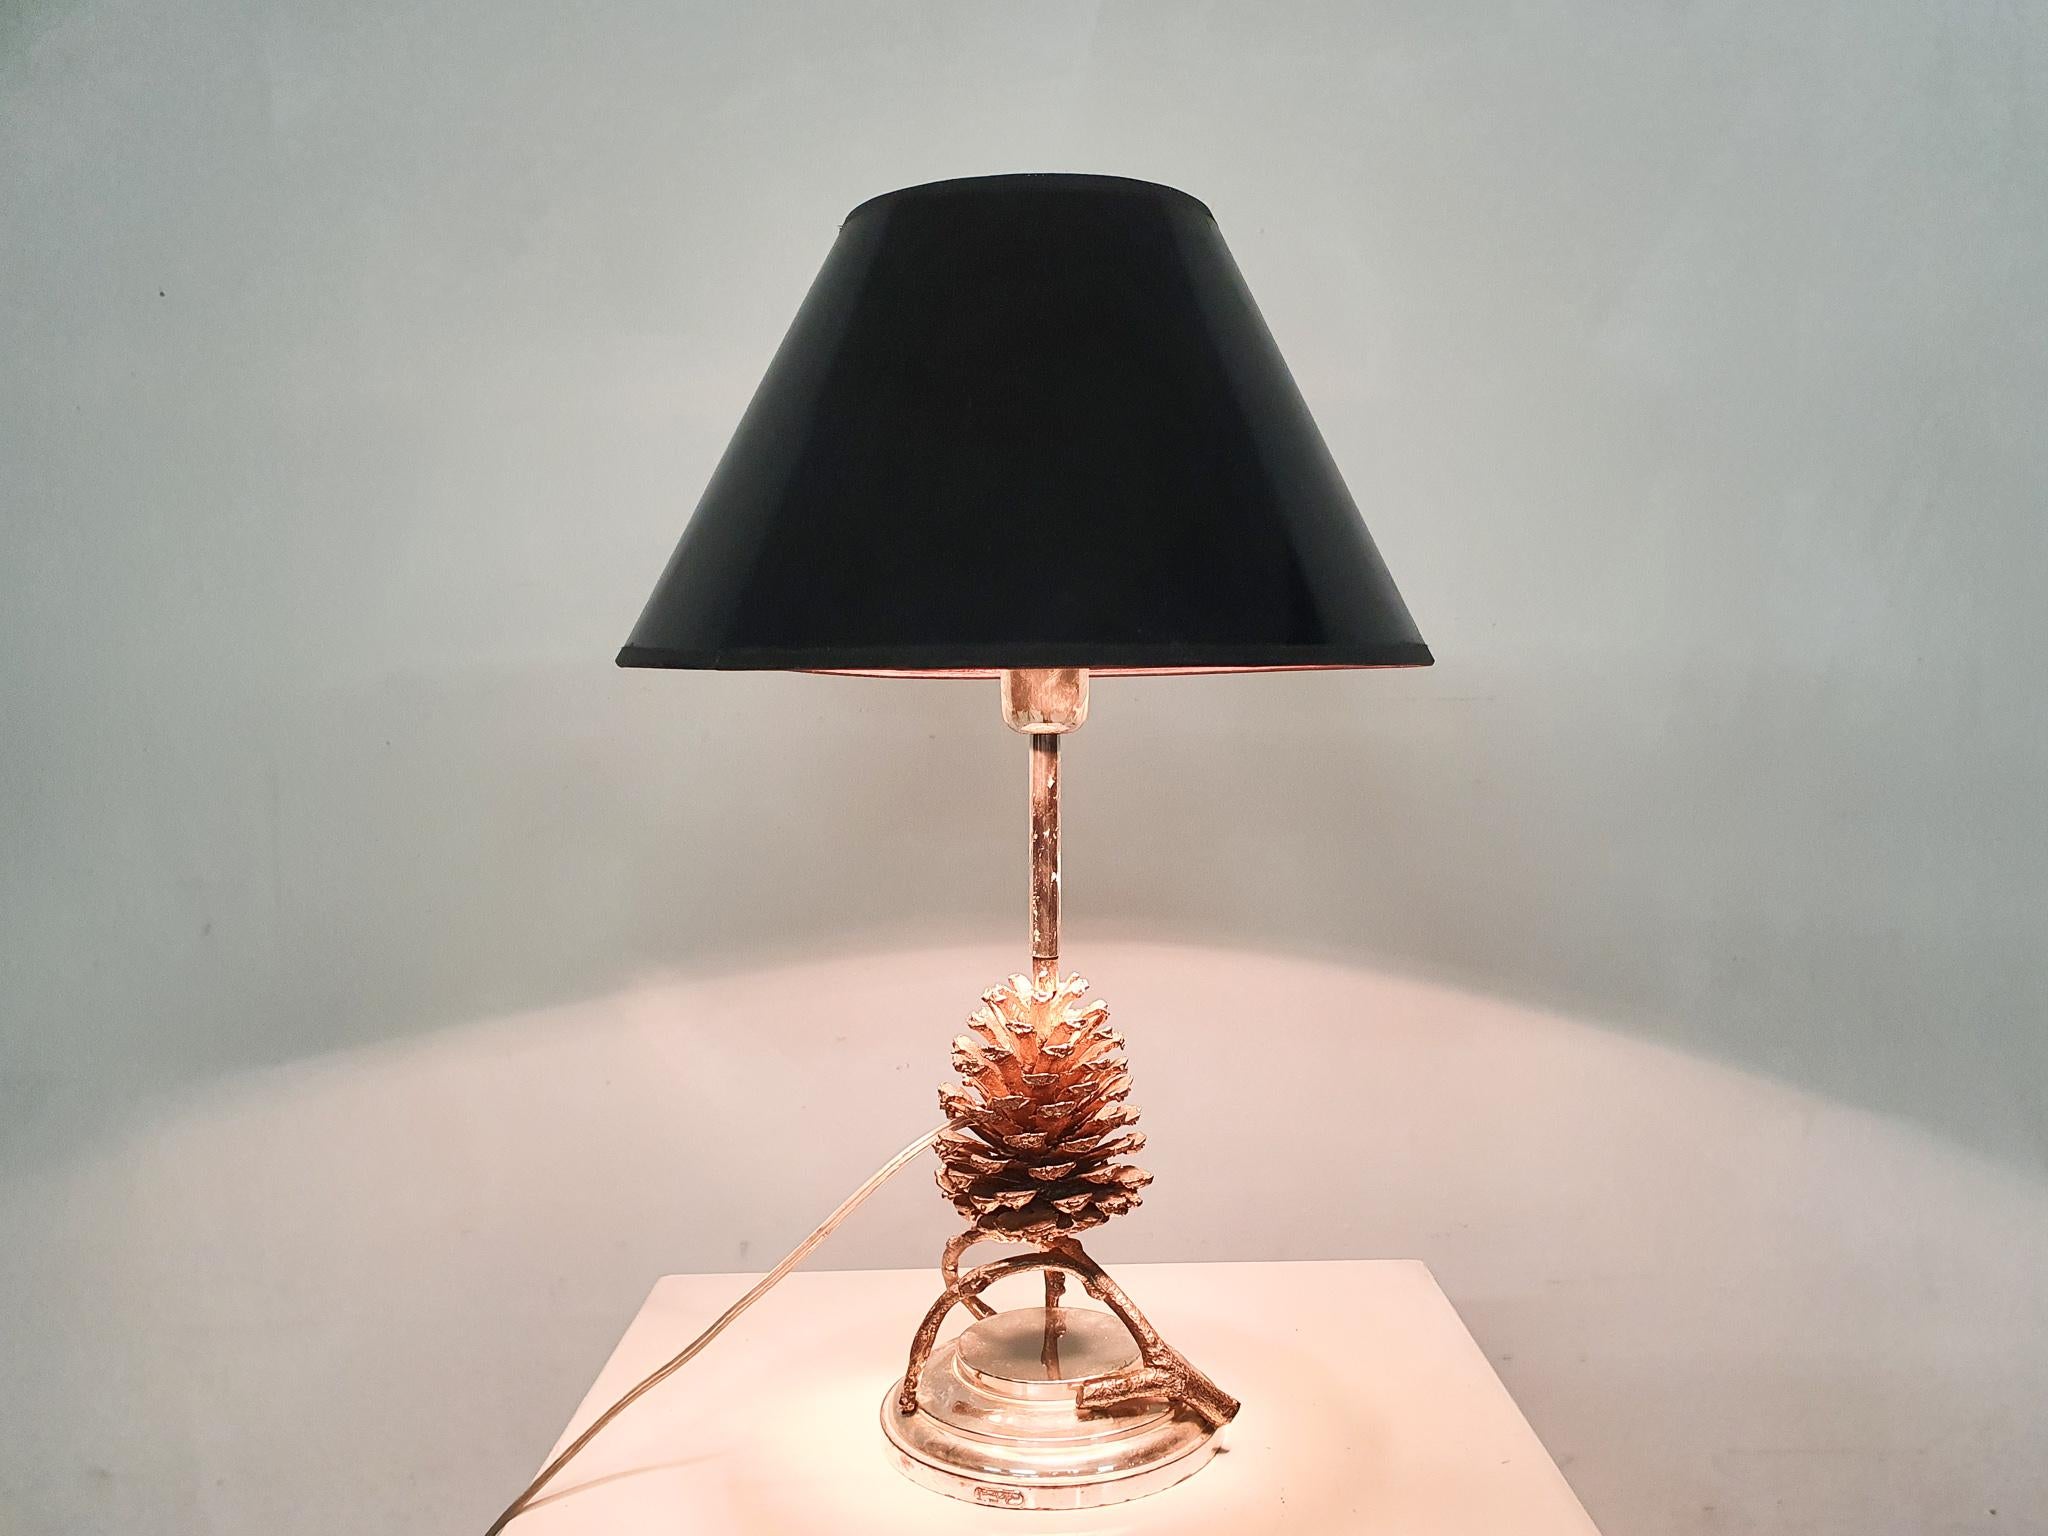 A luxurious, high-quality table lamp, made by Franco Lapini in Italy in the 1970s.

Franco Lapini is a maker of luxury items for the table. Everything is made by hand and is a unique object.

Our lamp is a pine cone made of bronze on a silver-plated